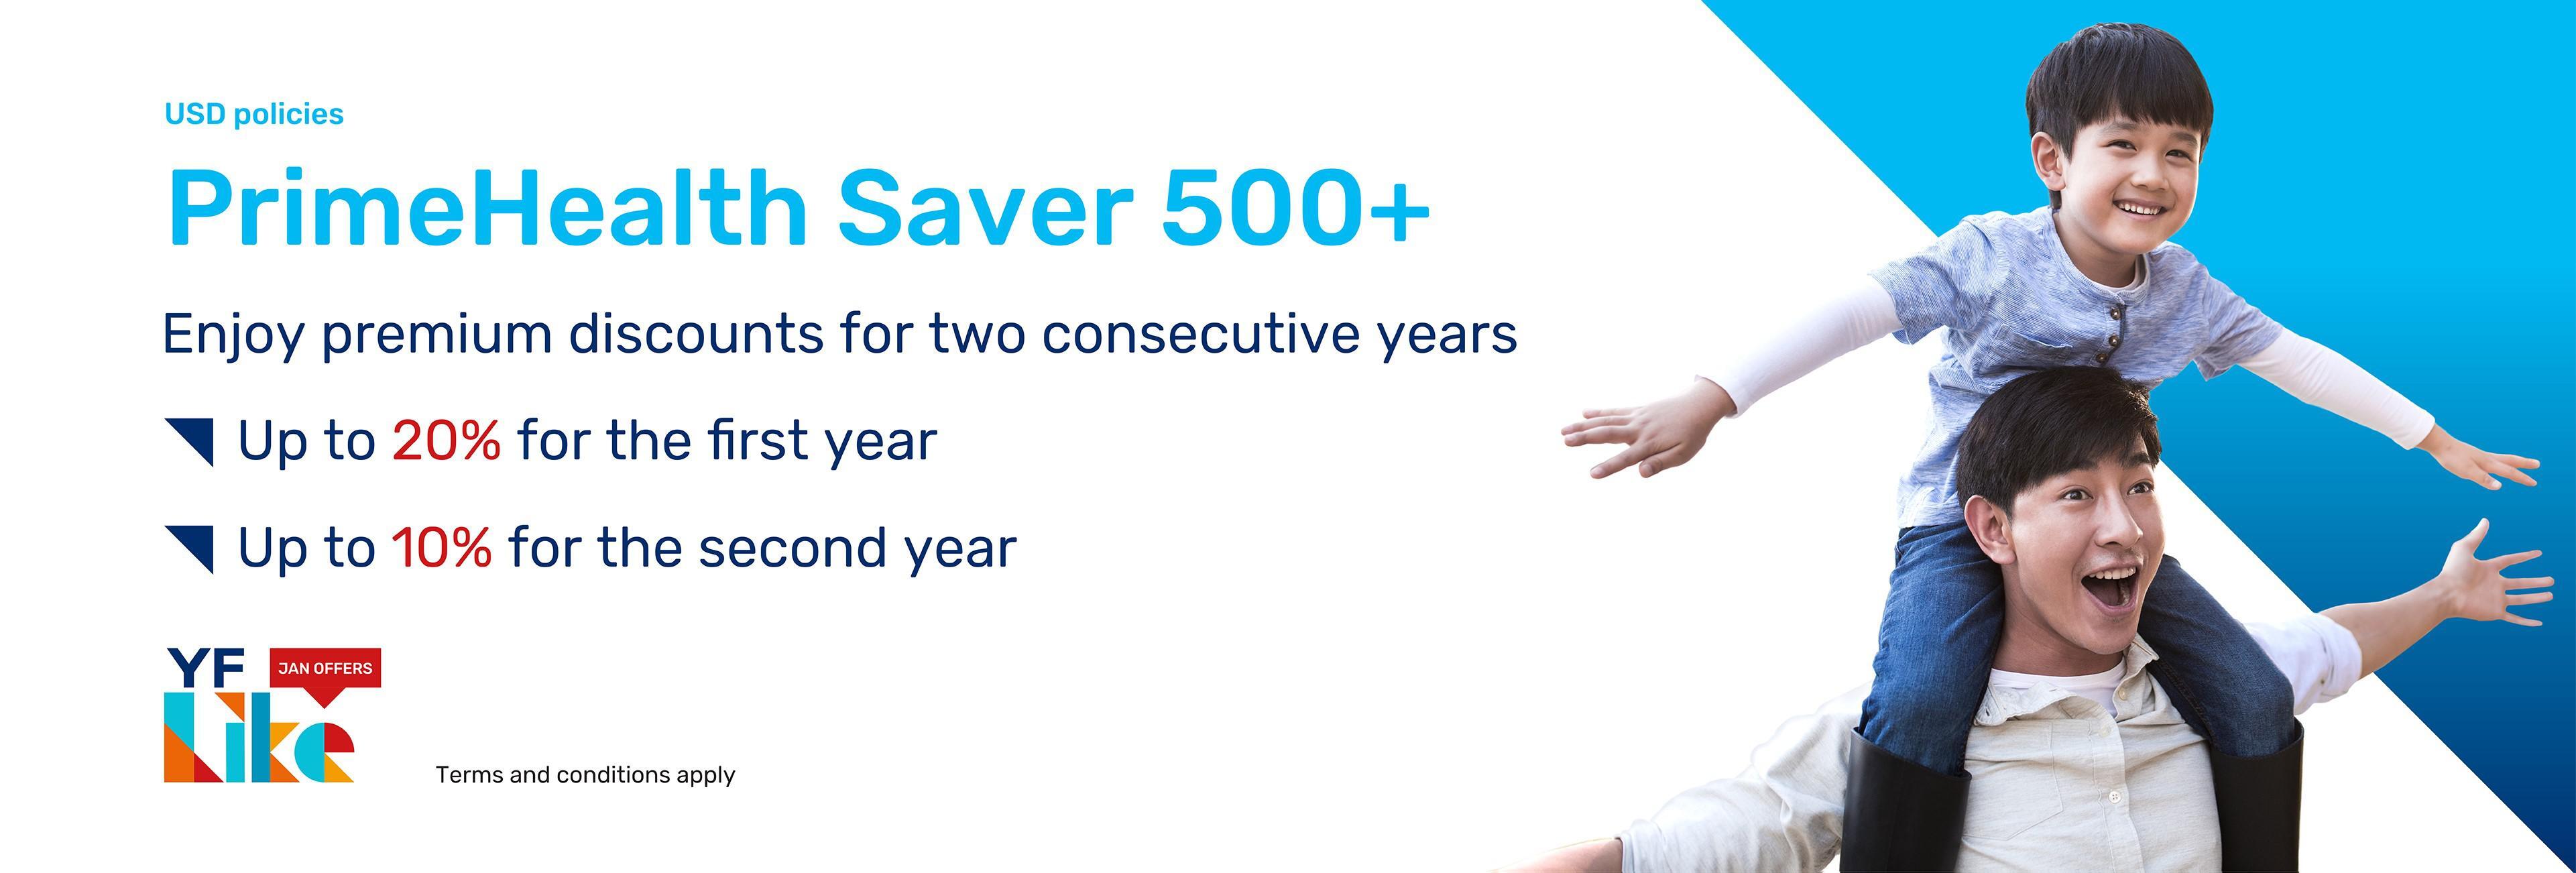 From now until January 29, upon successful application for a US dollar “PrimeHealth Saver 500+” policy to enjoy Dual Offers, including a first-year premium discount of up to 20% and a second-year premium discount of up to 10%, as well as up to 100% extra coverage for the first 15 years on major critical illness / death benefit.